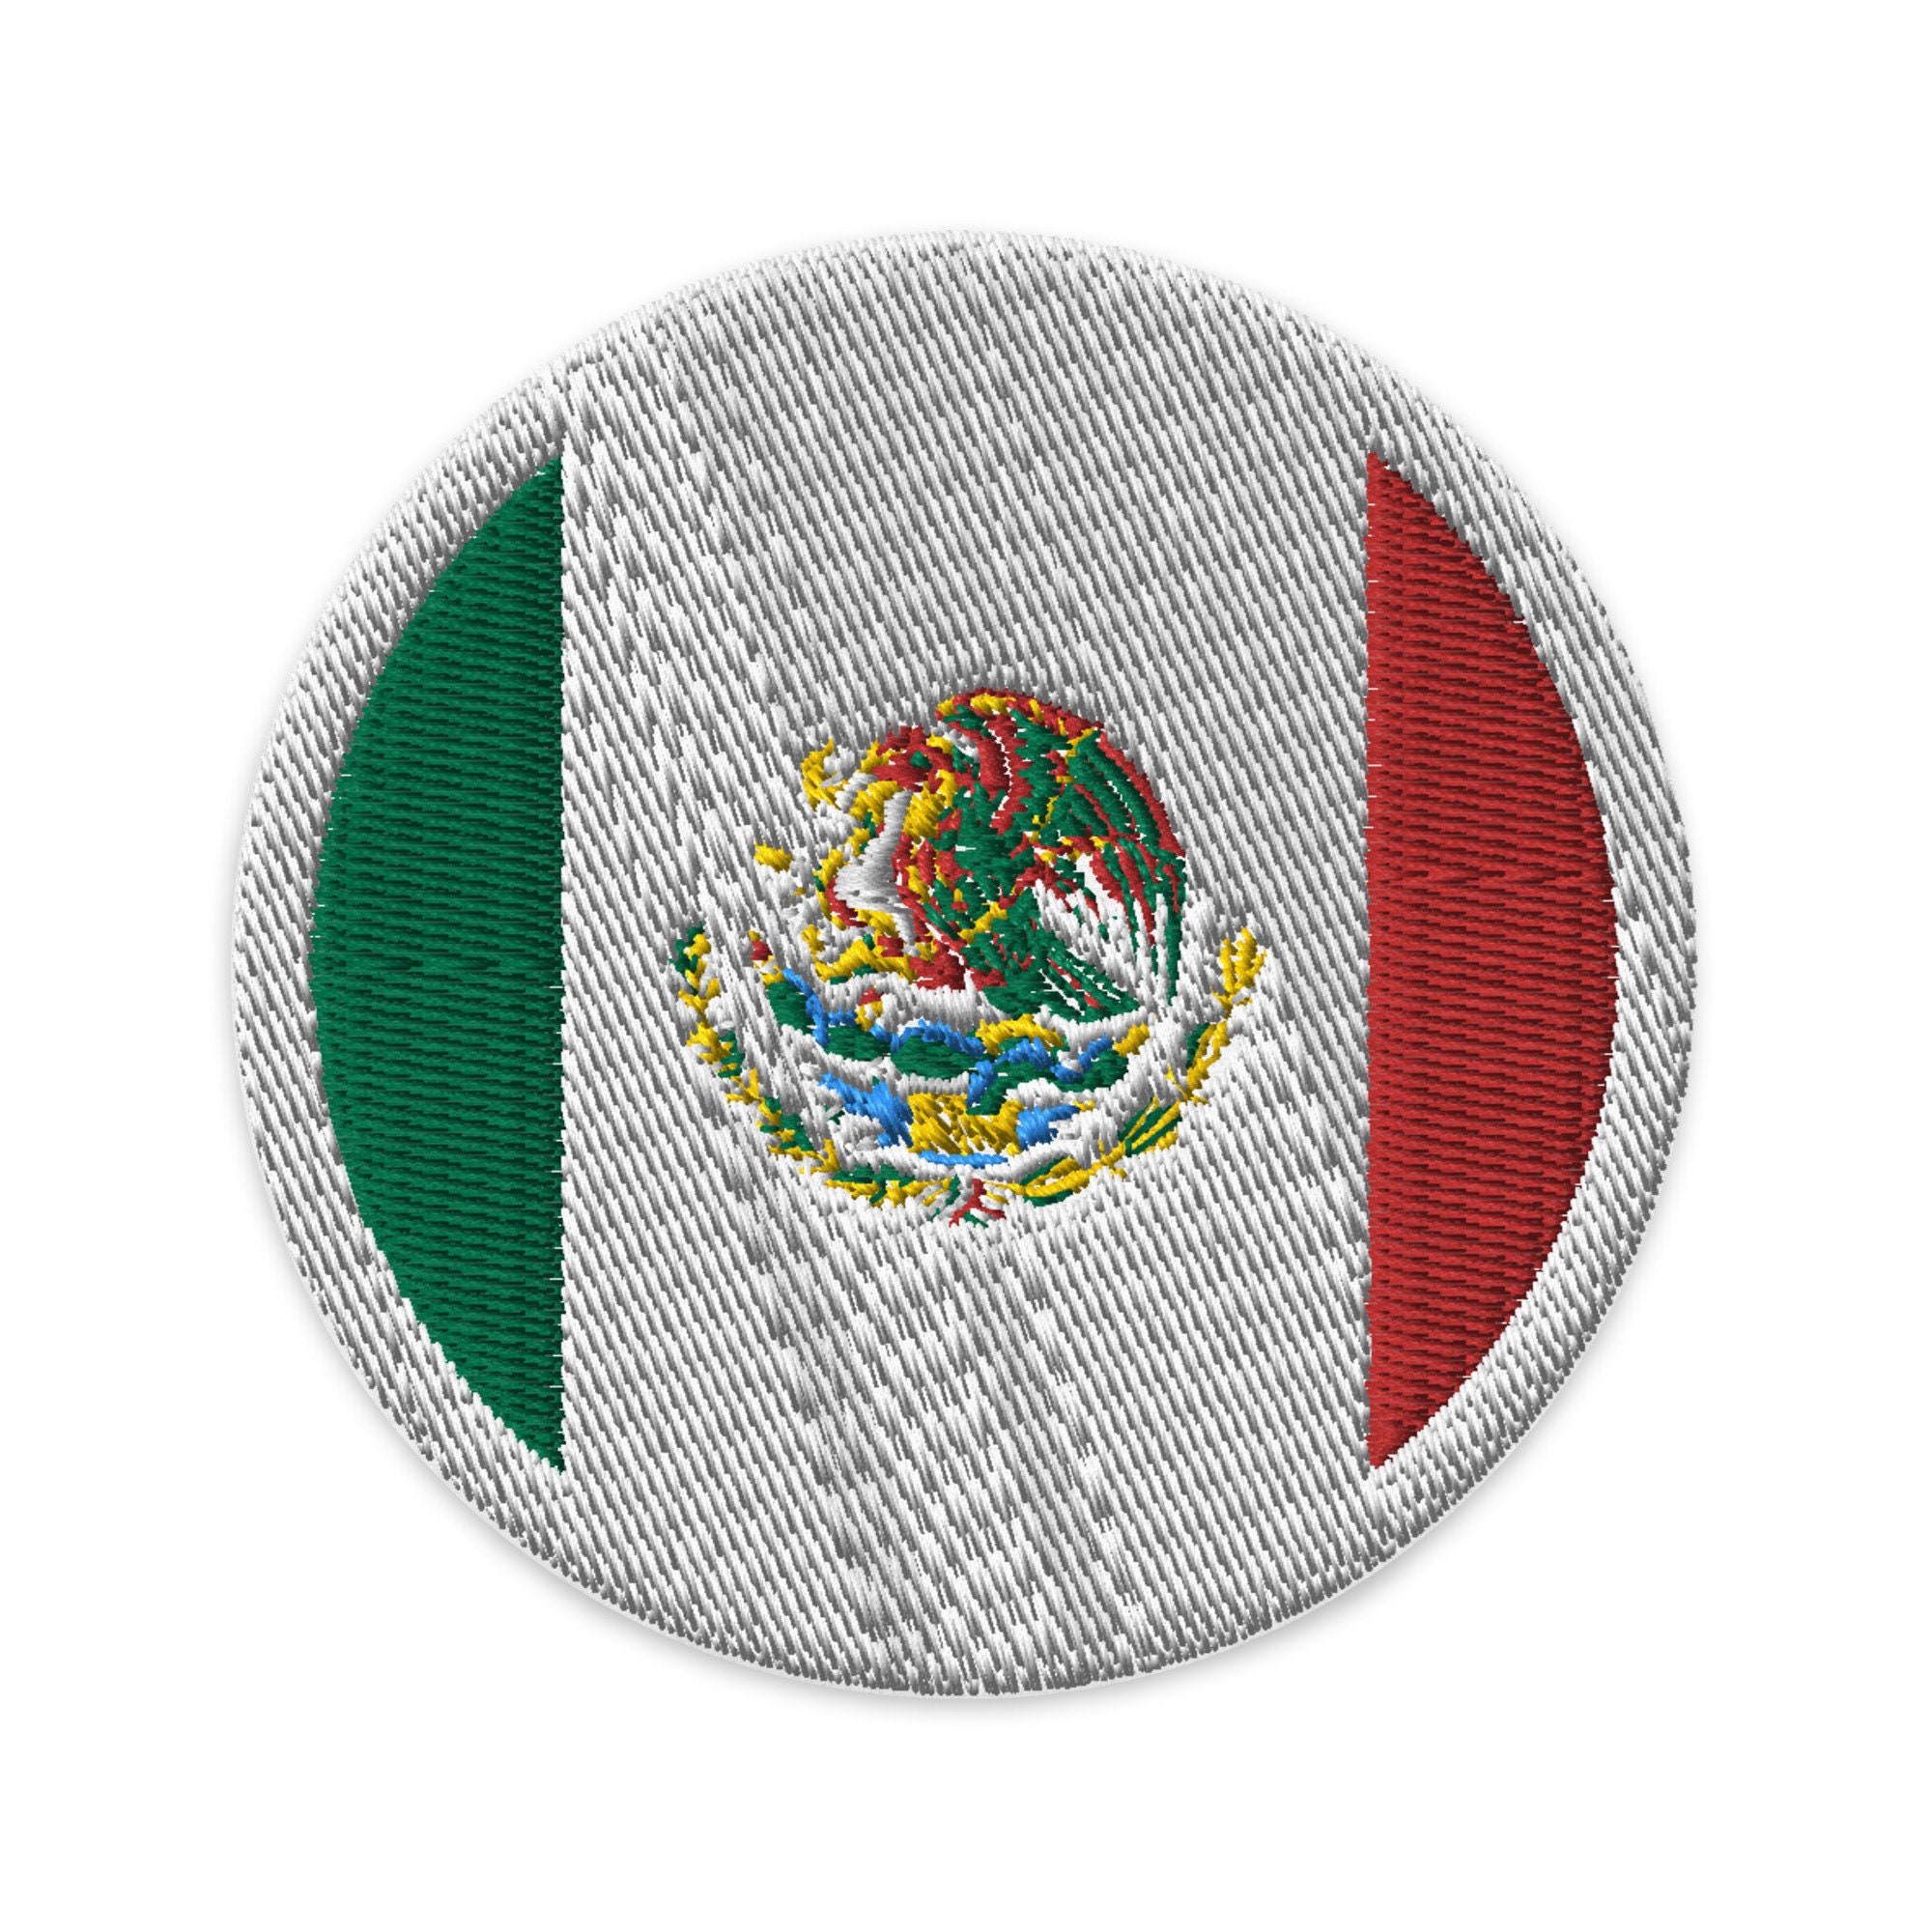 Embroidex Mexico Flag Iron On Patch For Clothes PT0134 S: Vibrant Colors,  Exquisite Embroidery, Lasting Adhesion From Patchesfactory, $11.05